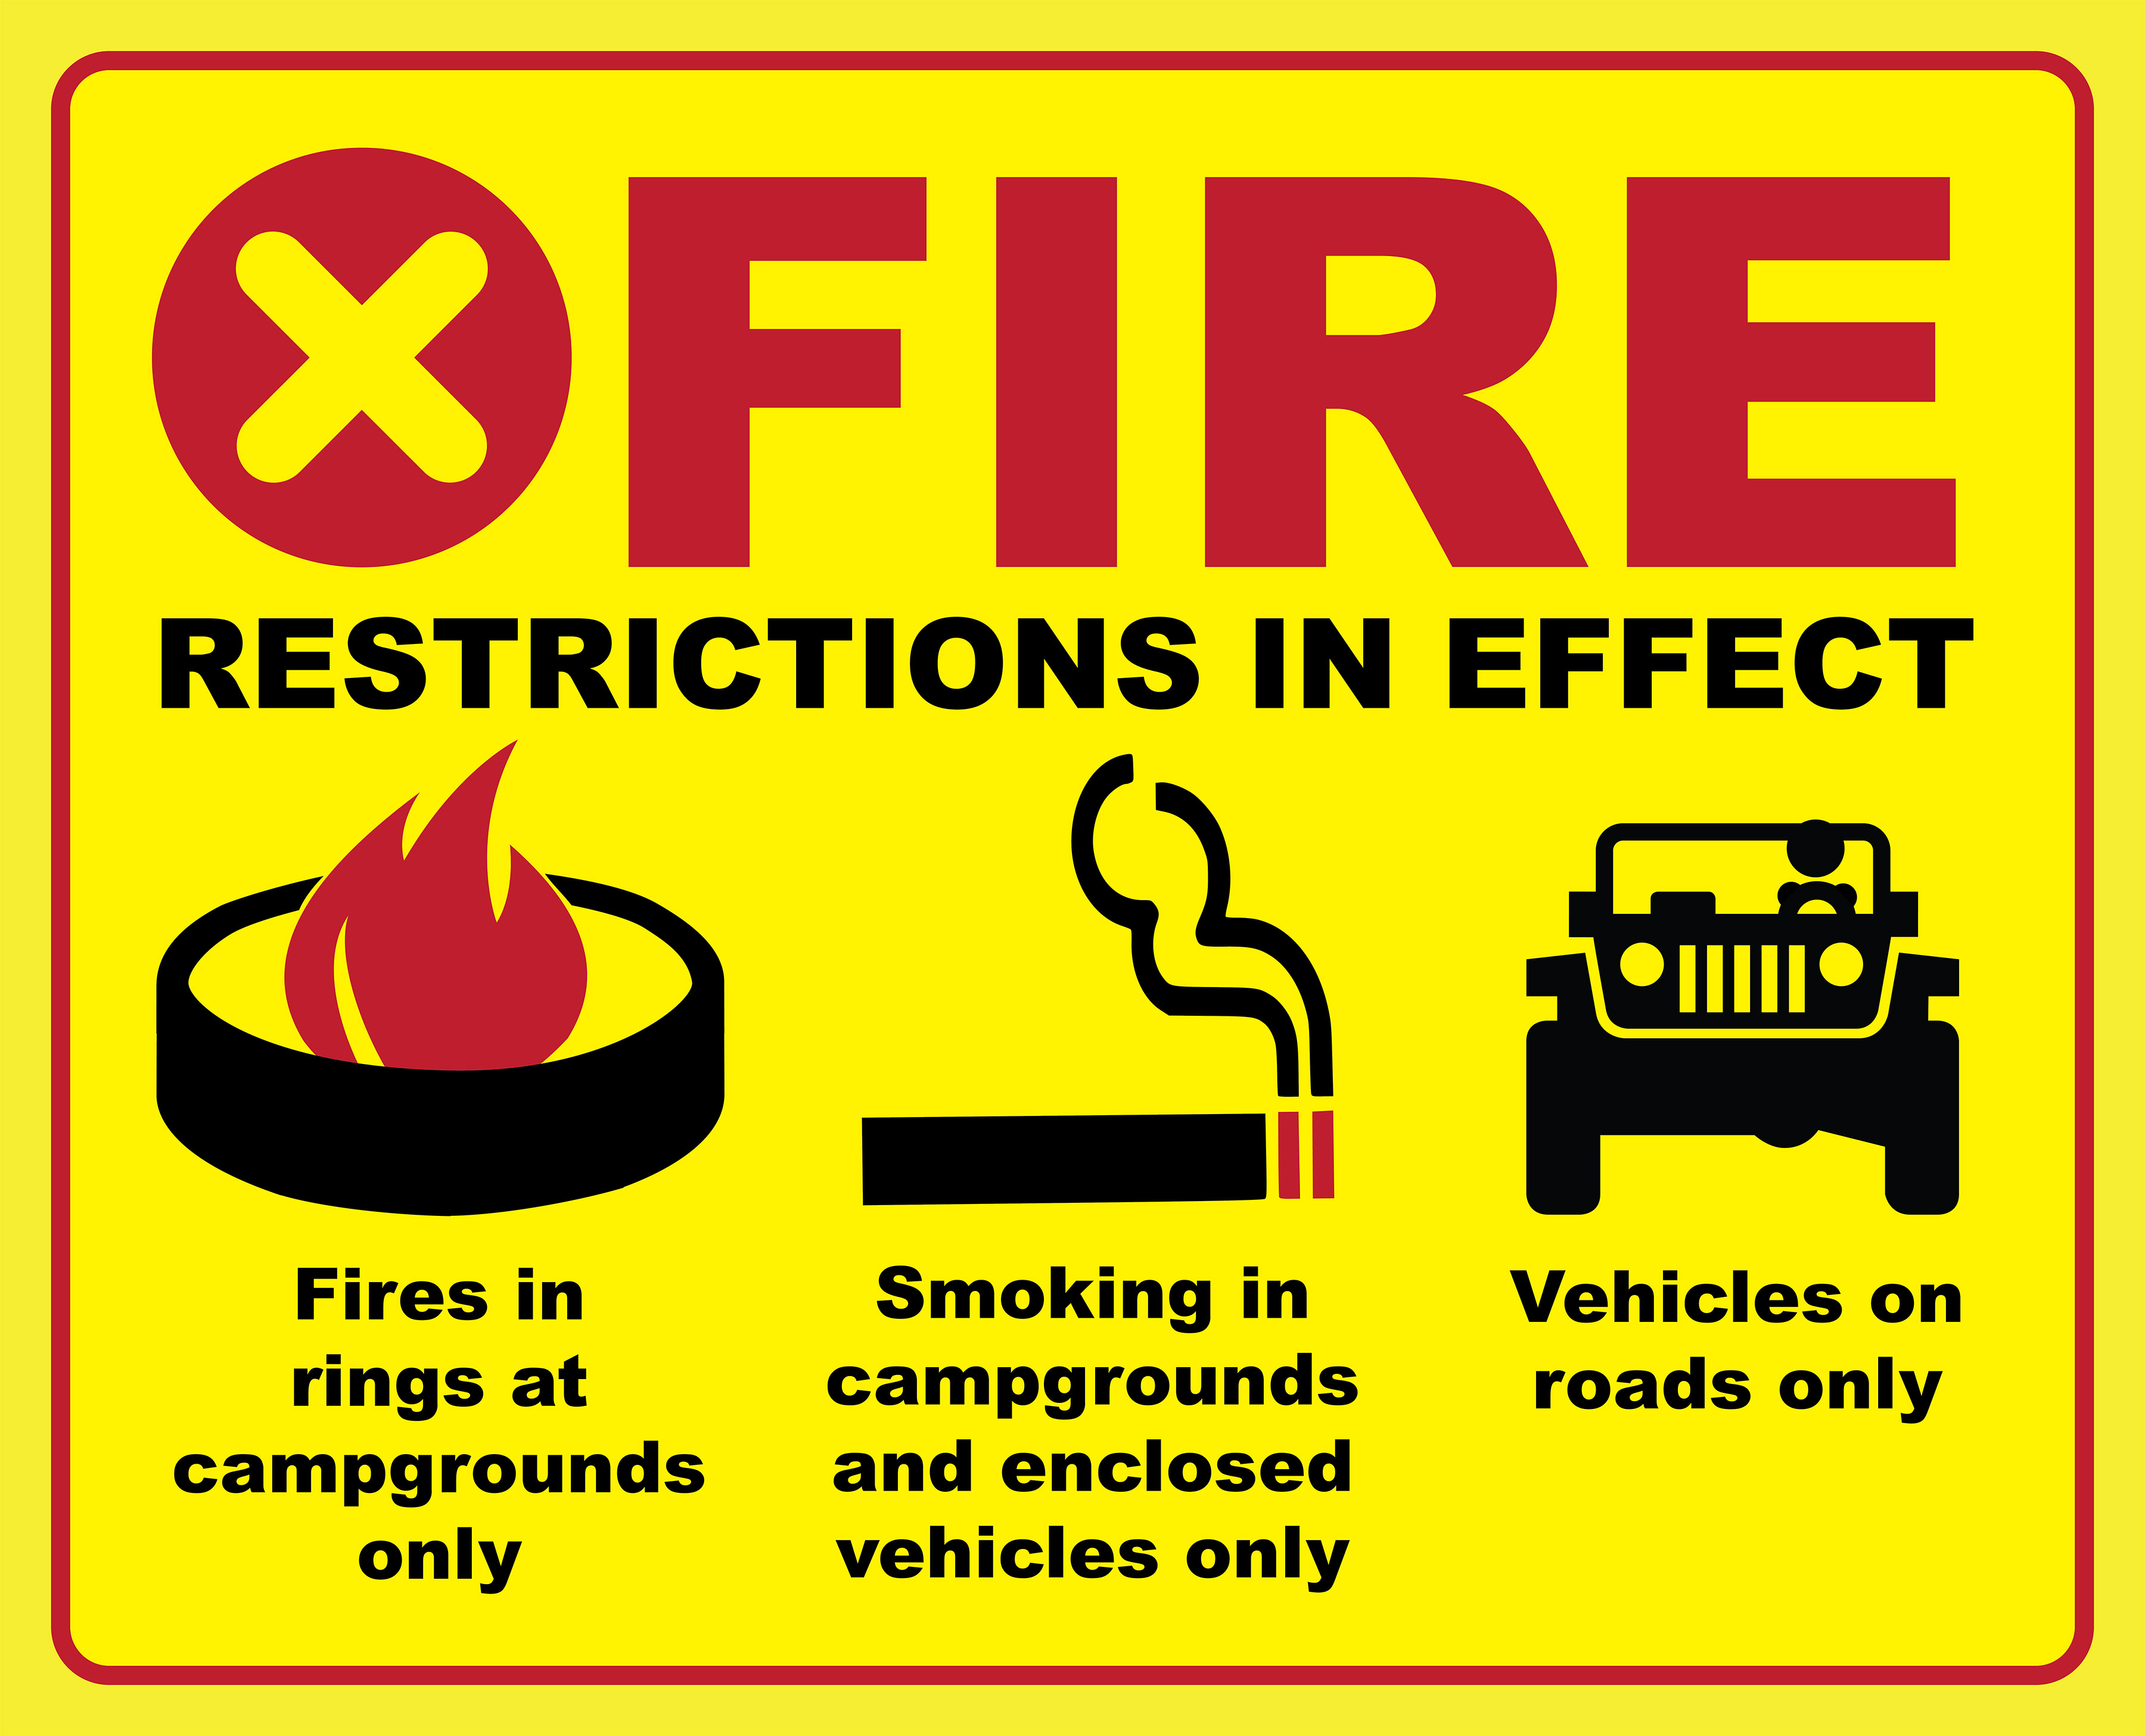 Bright yellow background with red border; "Fire restrictions in effect"; campfire ring icon with "fires in rings at designated campgrounds only" text; smoking icon with "Smoking in campgrounds and enclosed vehicles only" text;  vehicle icon with "vehicles on roads only" text.